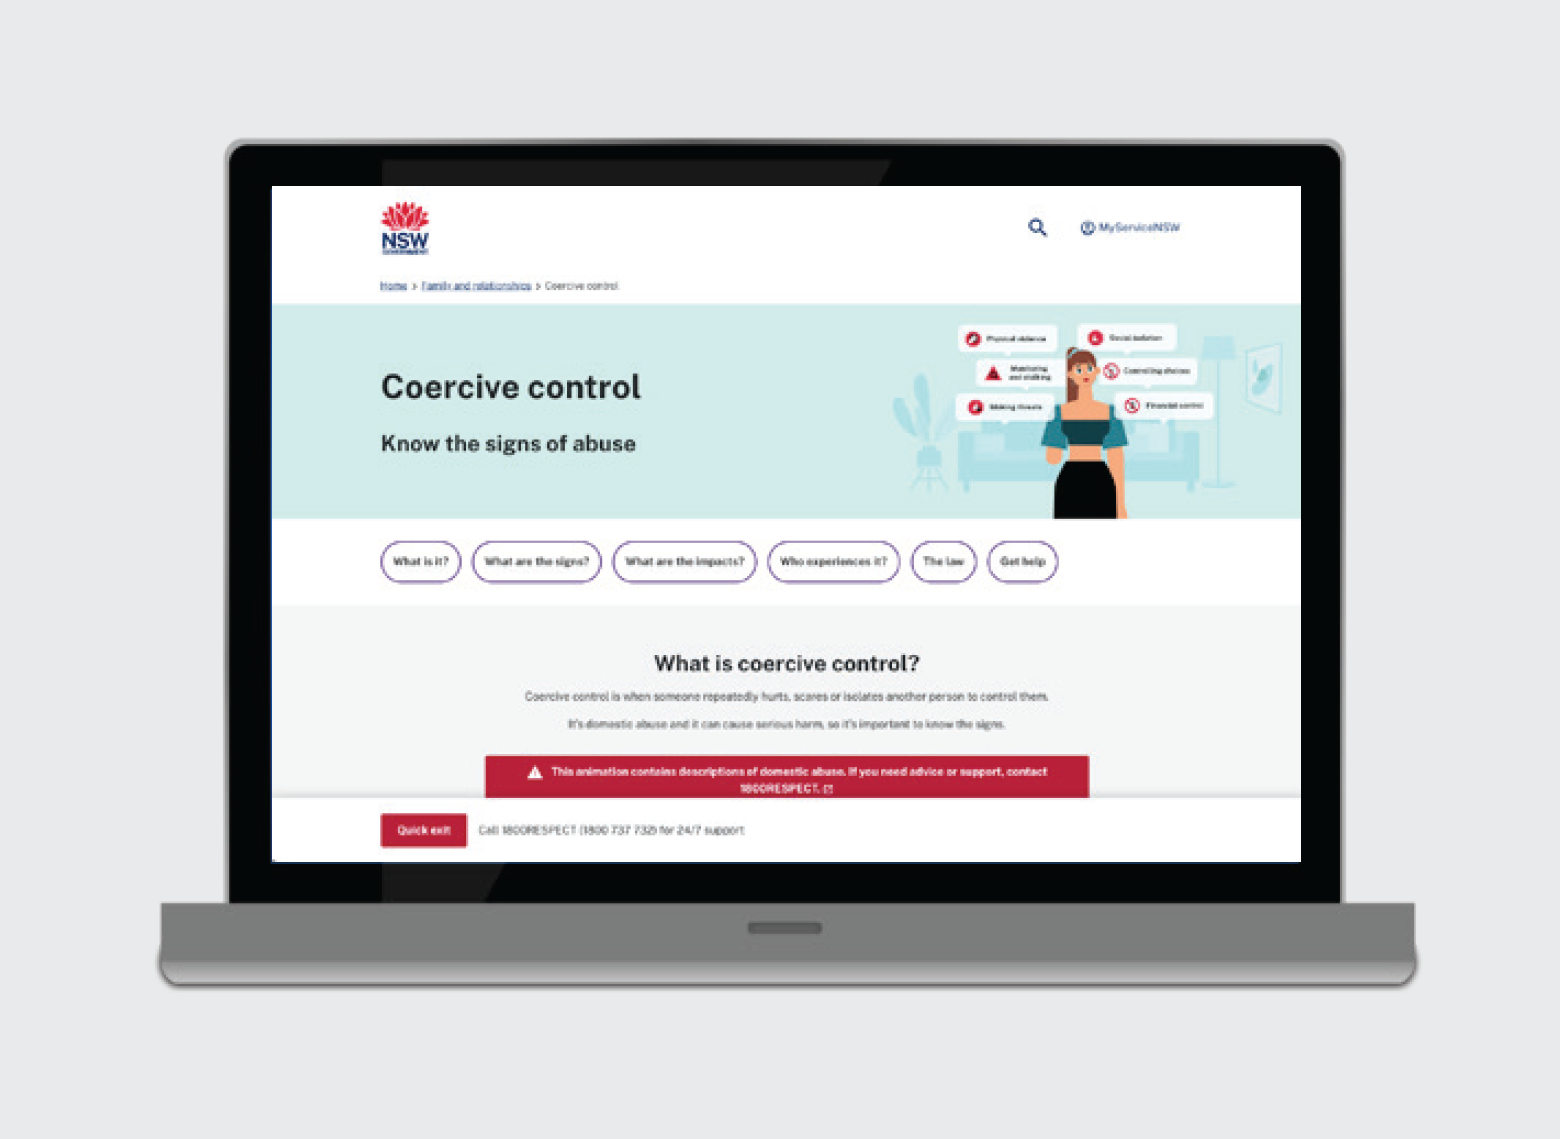 There is more information about coercive control and supports on our website at www.nsw.gov.au/coercive-control 